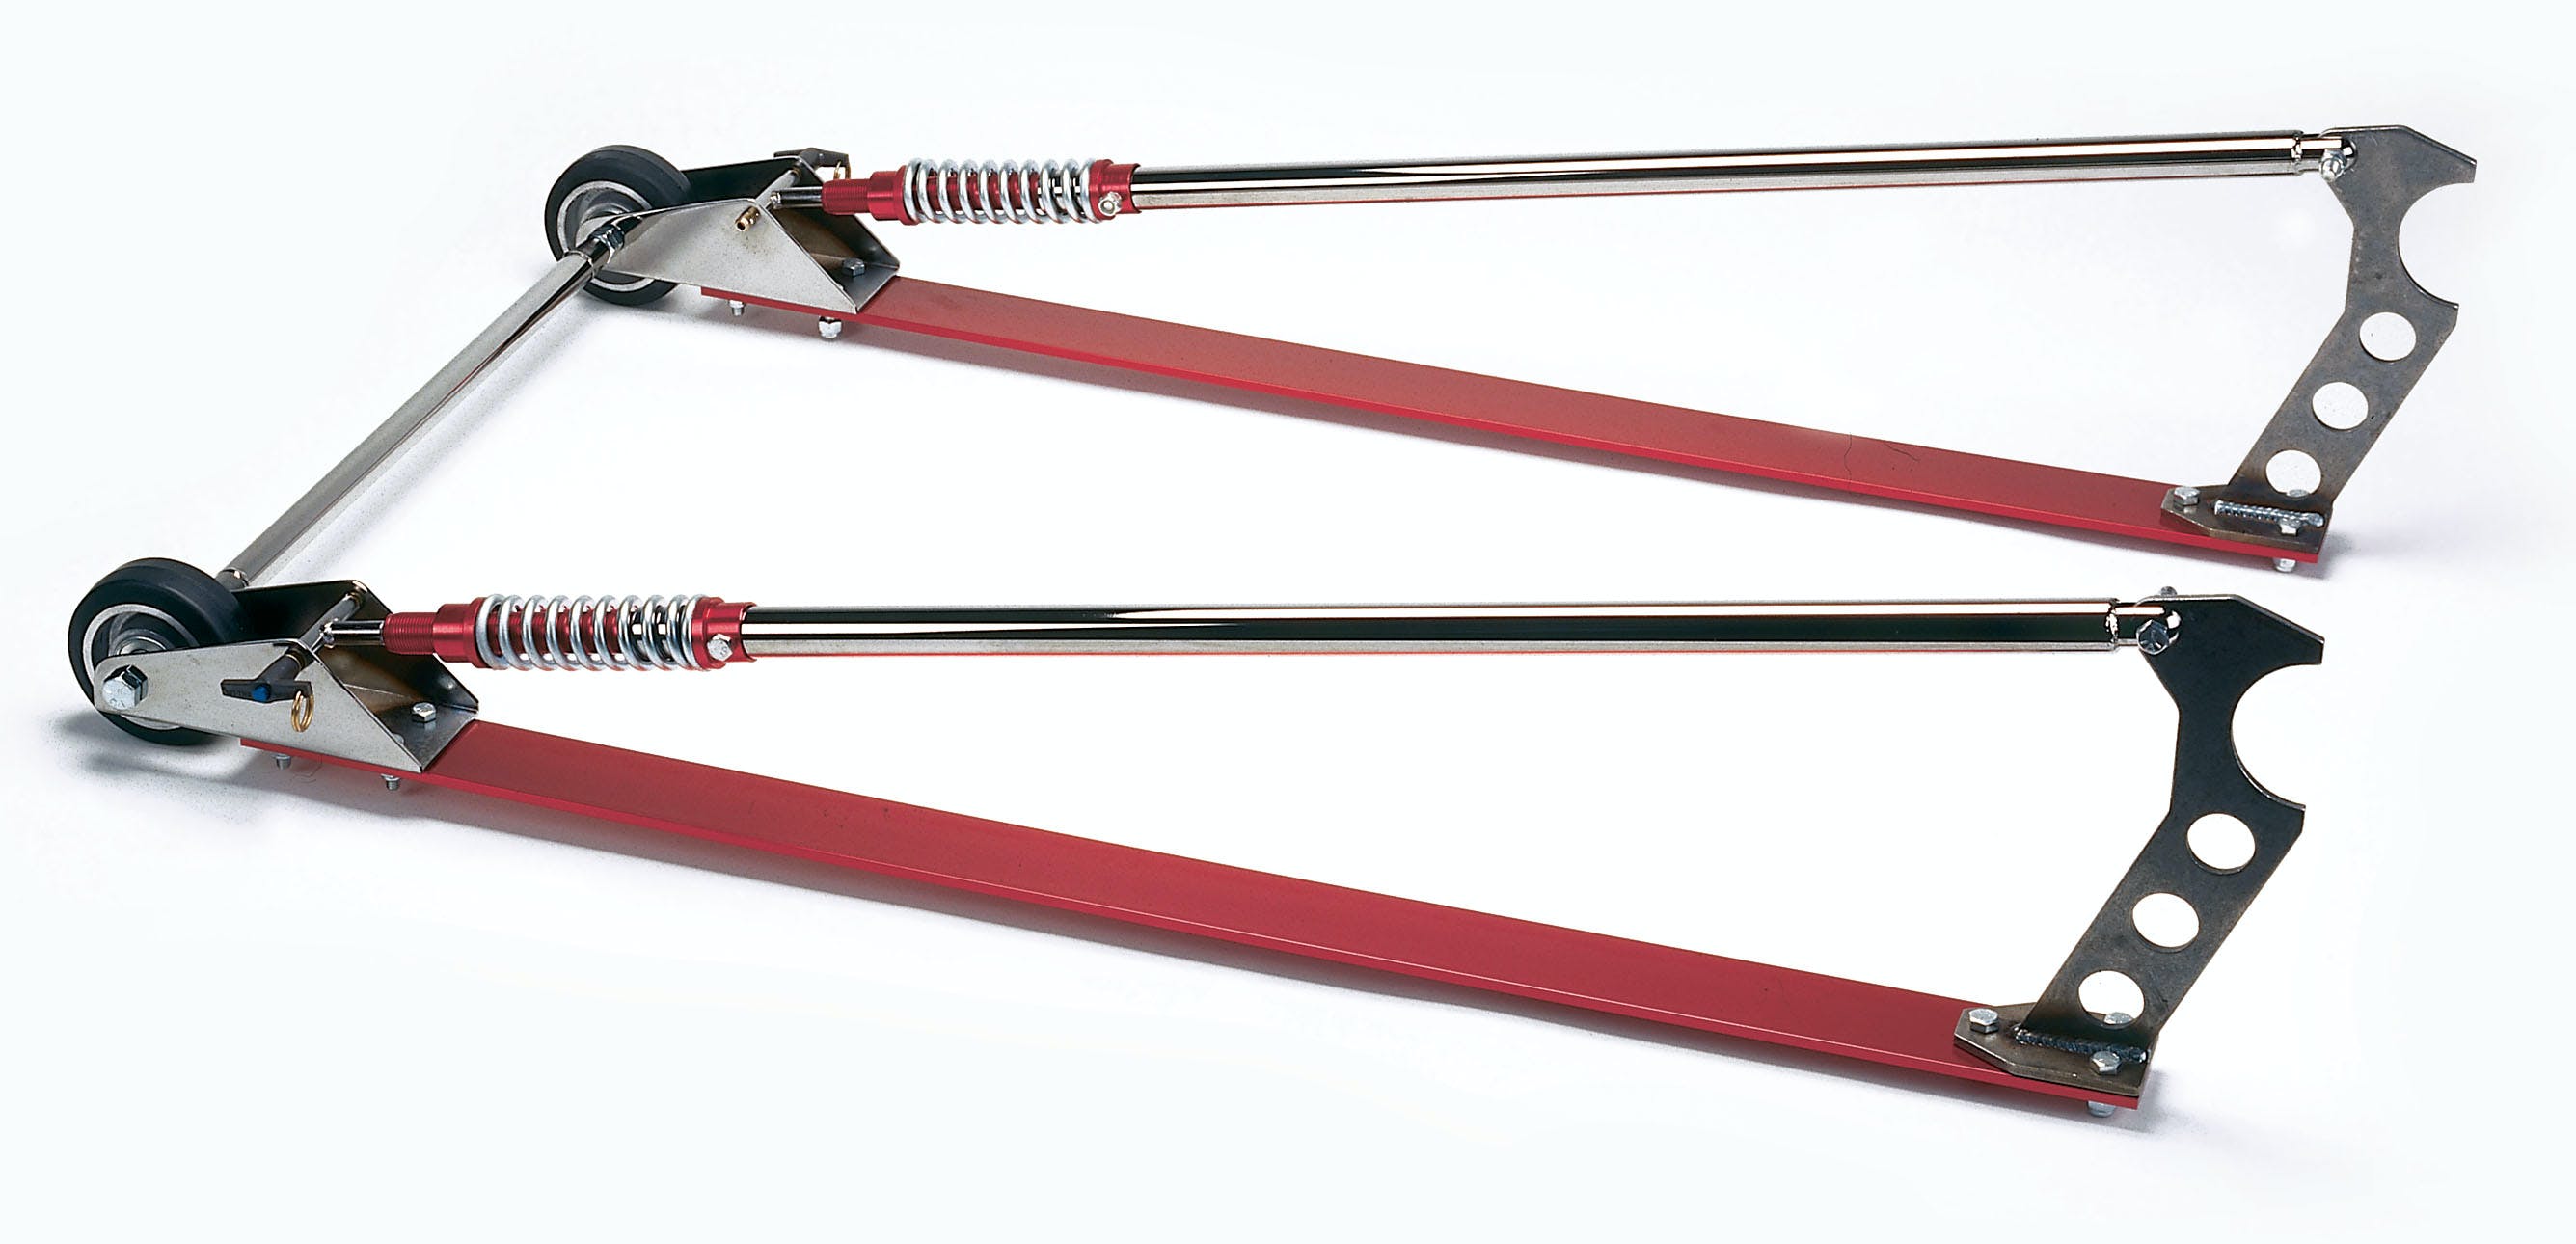 Competition Engineering C2040 Wheel-E-Bar,Chrome and Red finish